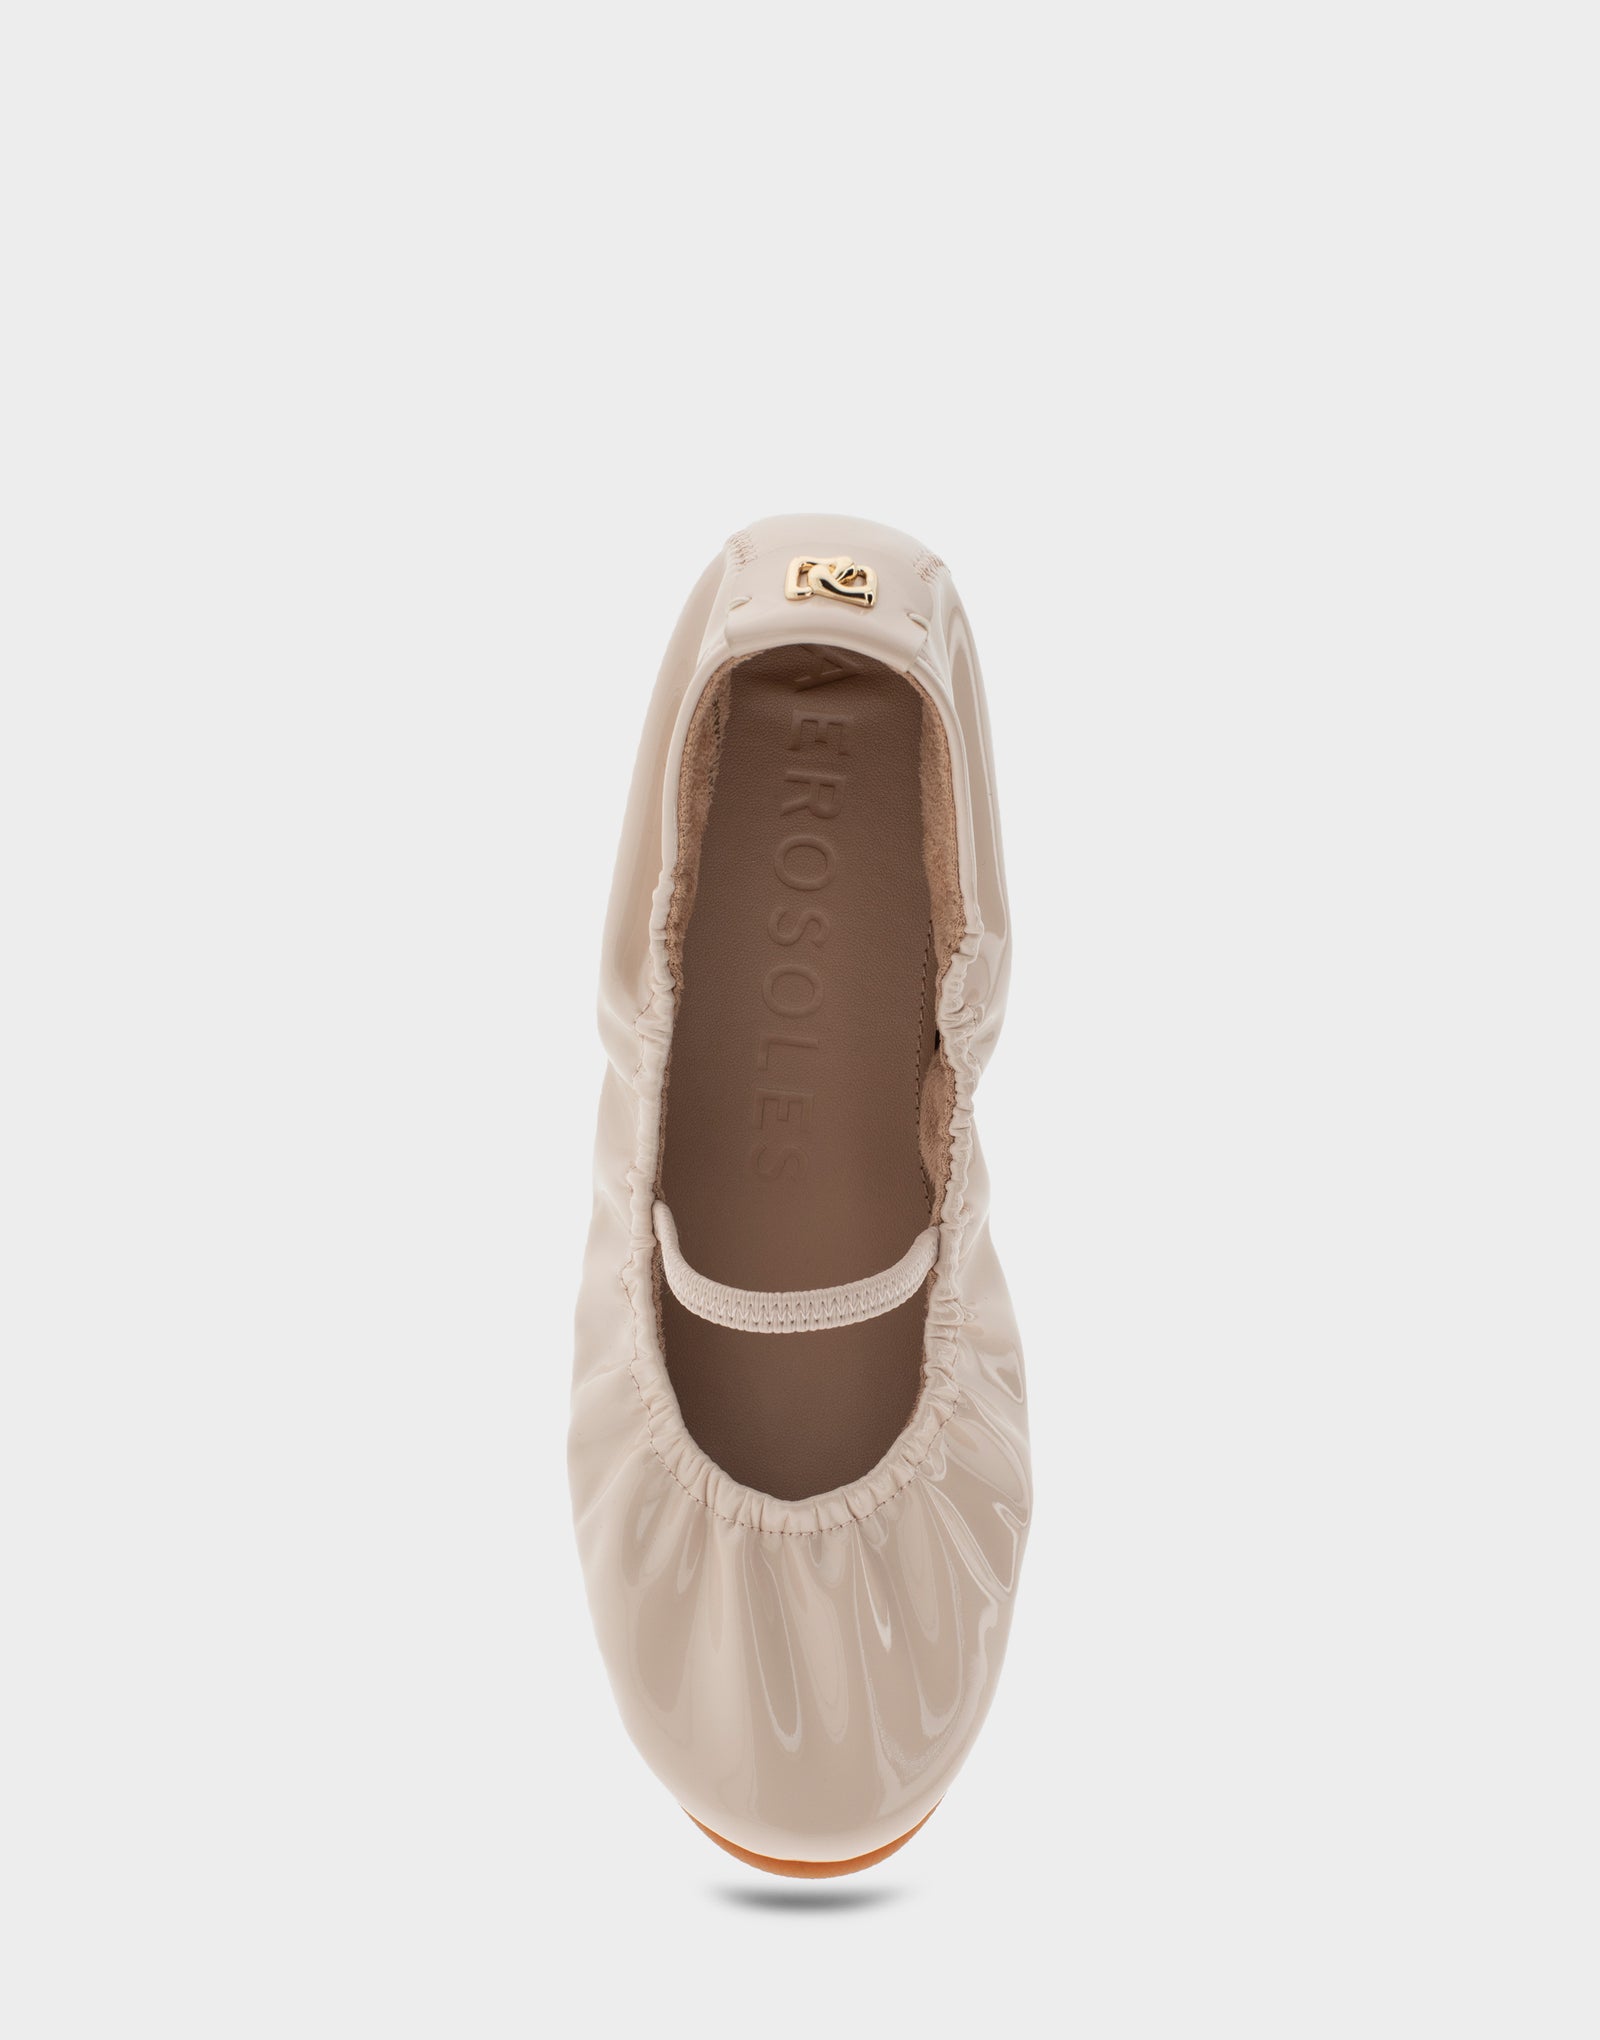 Women's Foldable Ballet Flat in Natural